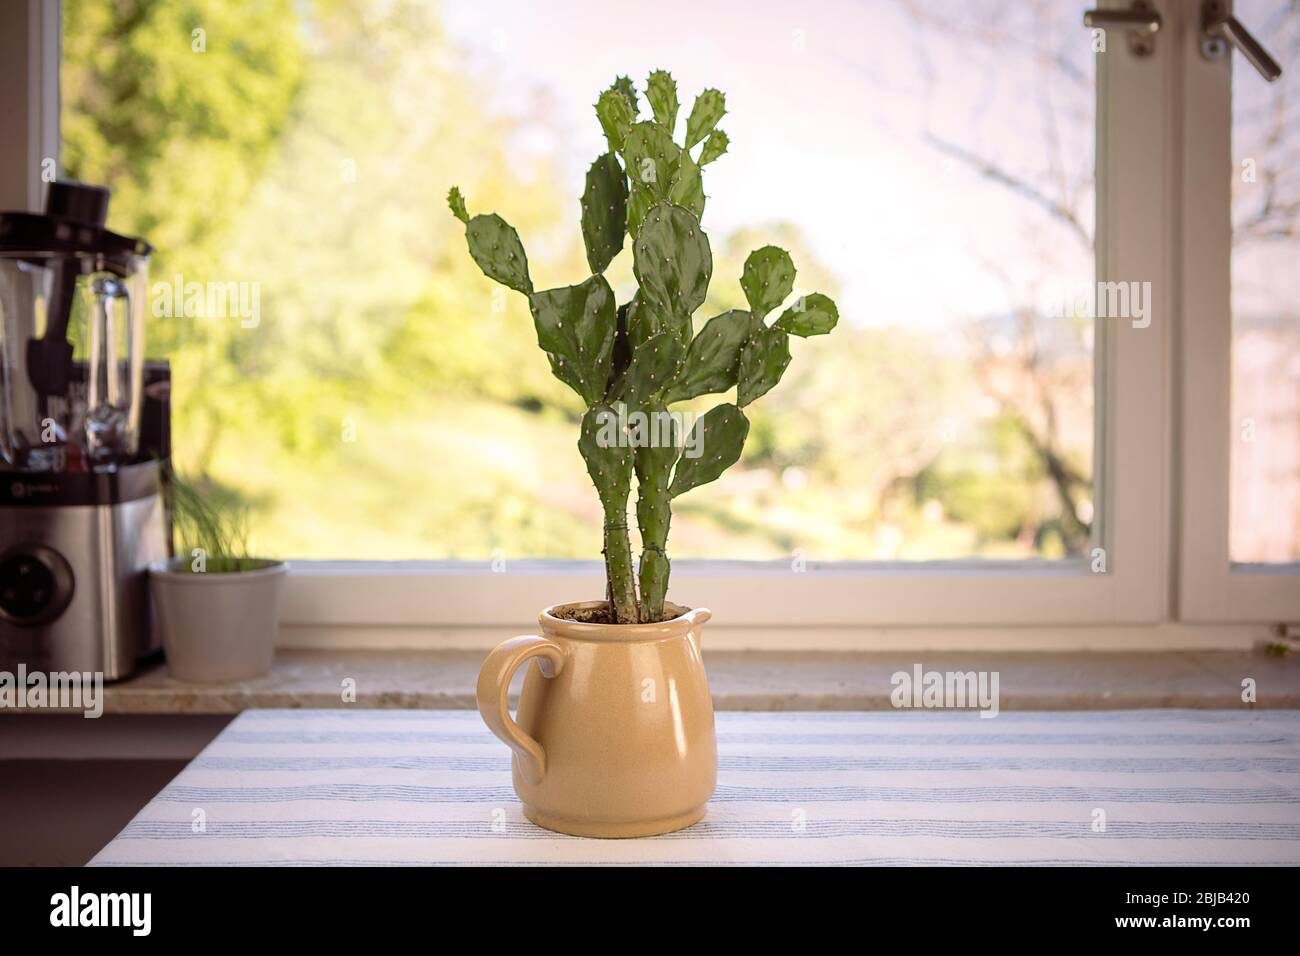 Cactus in flower pot. Opuntia ficus-indica, prickly pear or Indian fig. Cute cacti house plant on the table by the window. Stock Photo